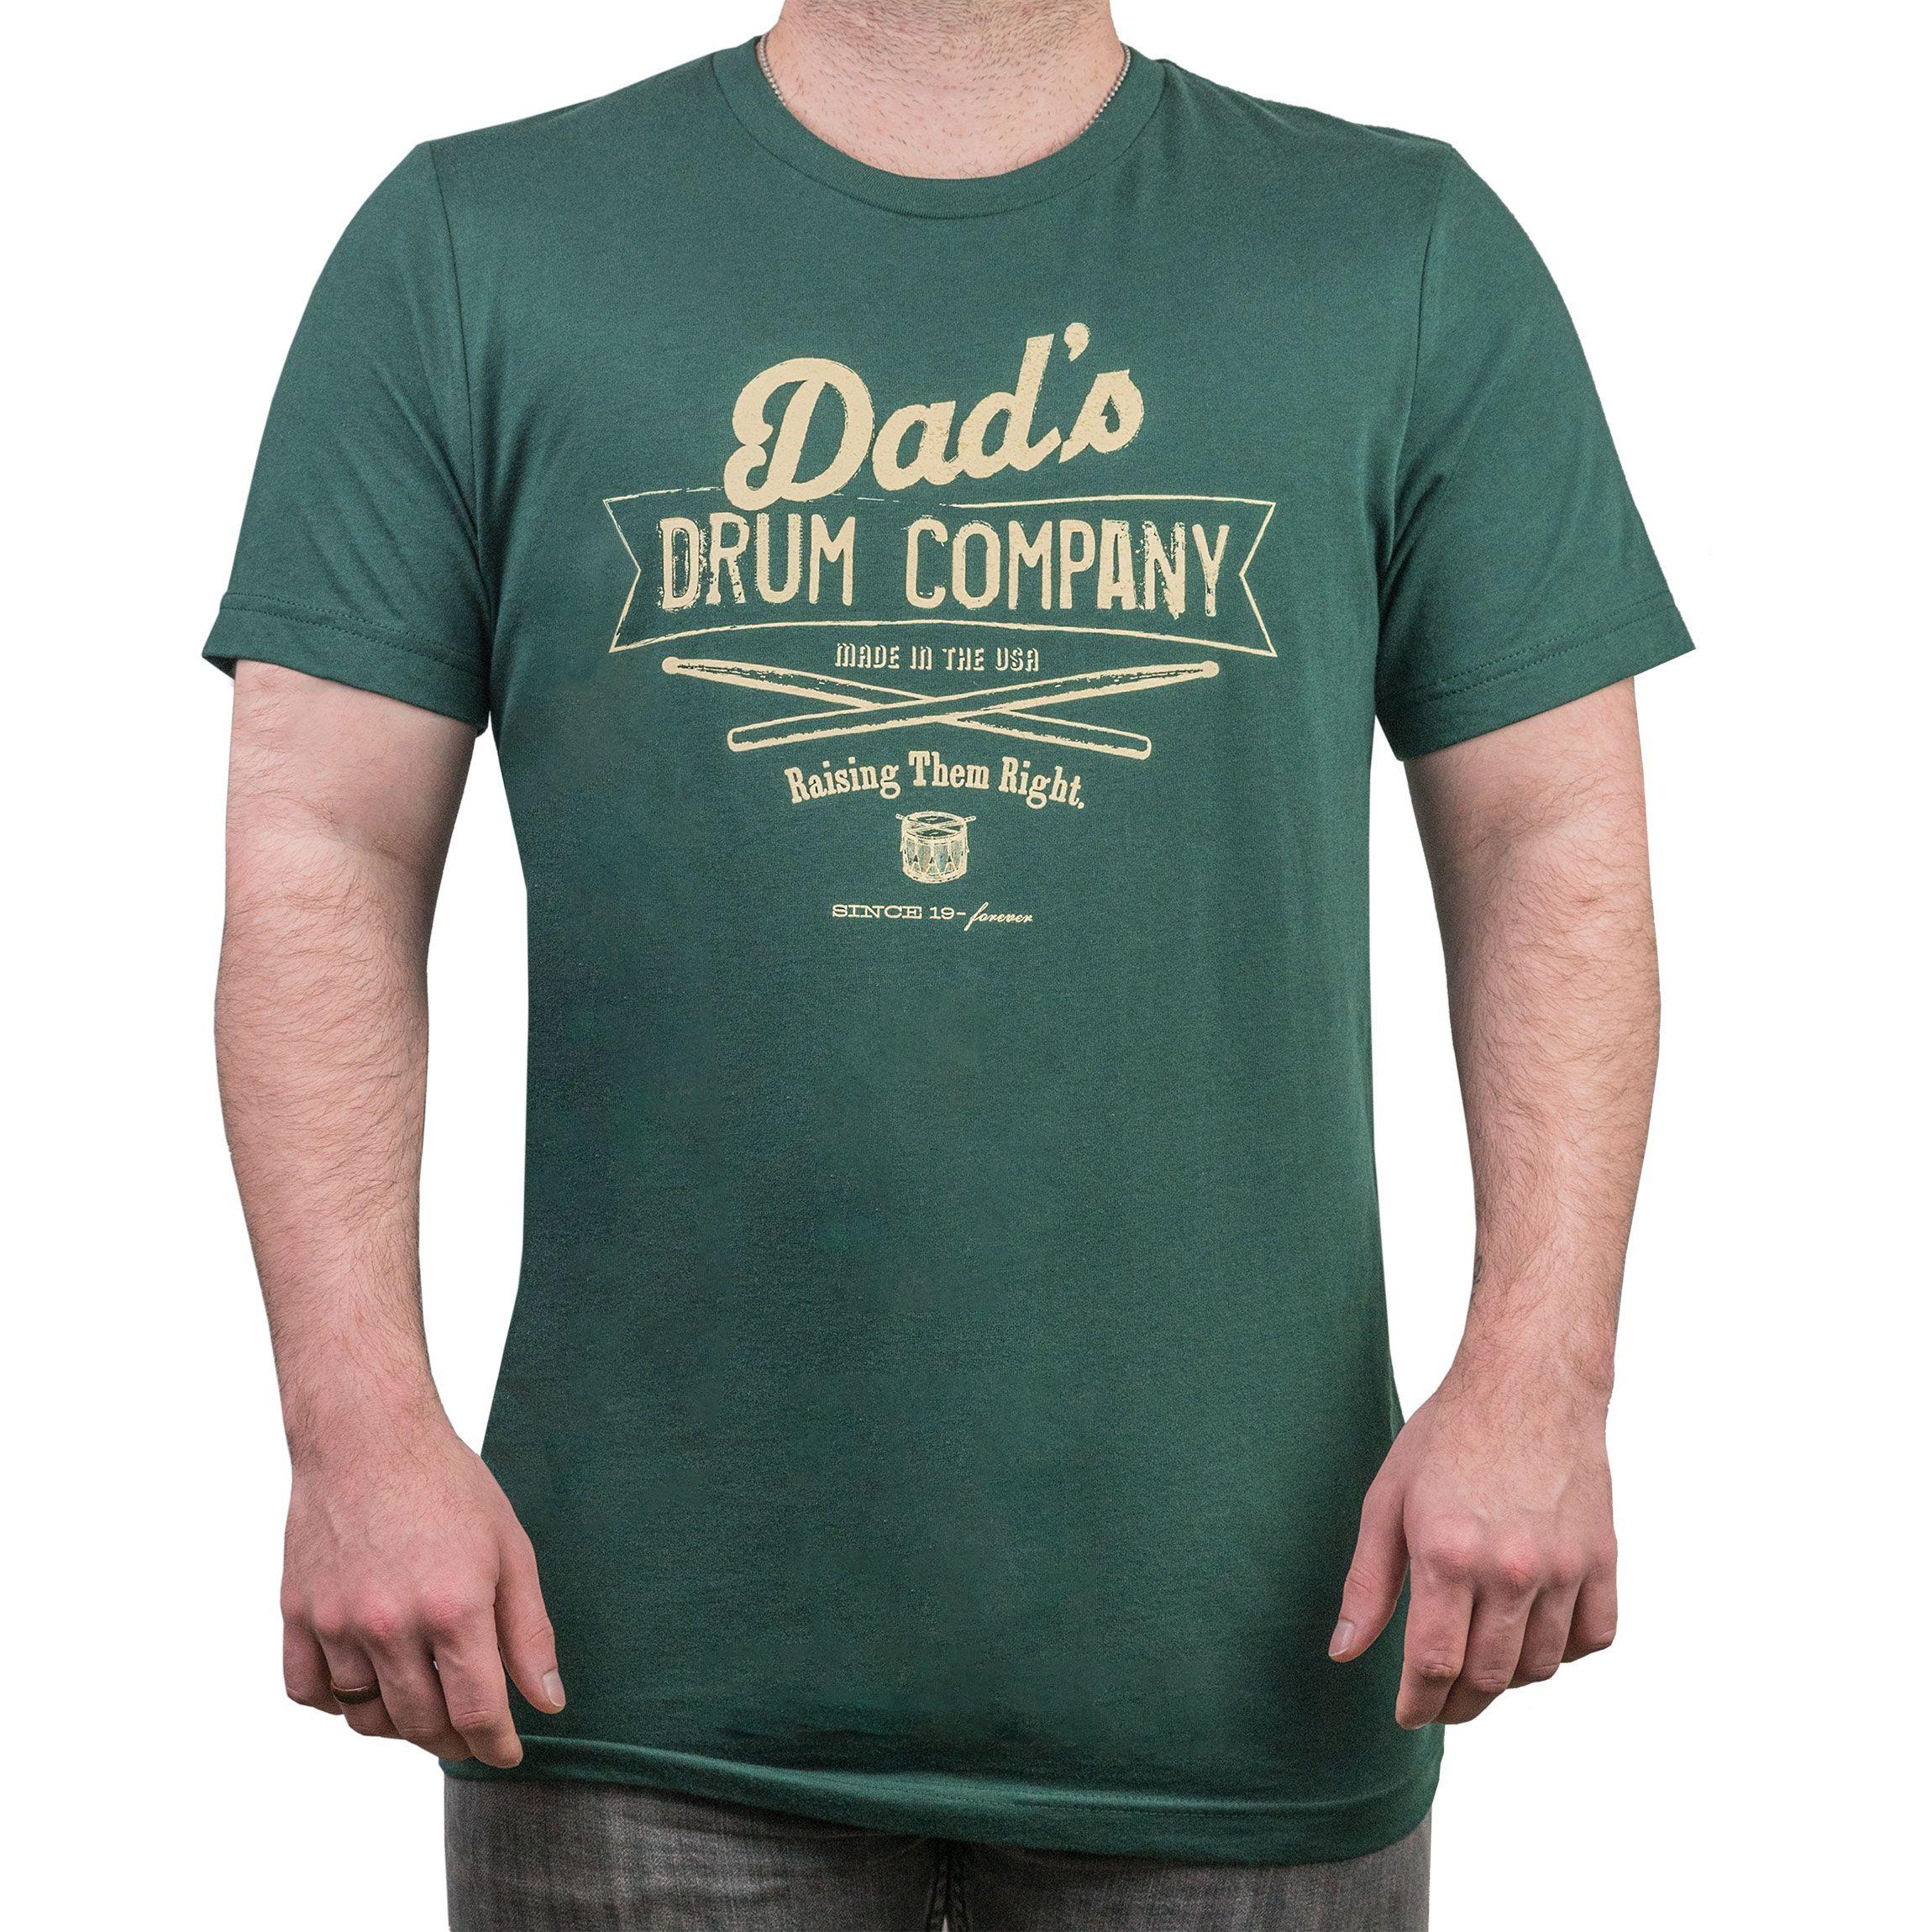 Star Shirt Company Logo - Lone Star Percussion Dad's Drum Company Drummer T-Shirt (LSP-DADS)